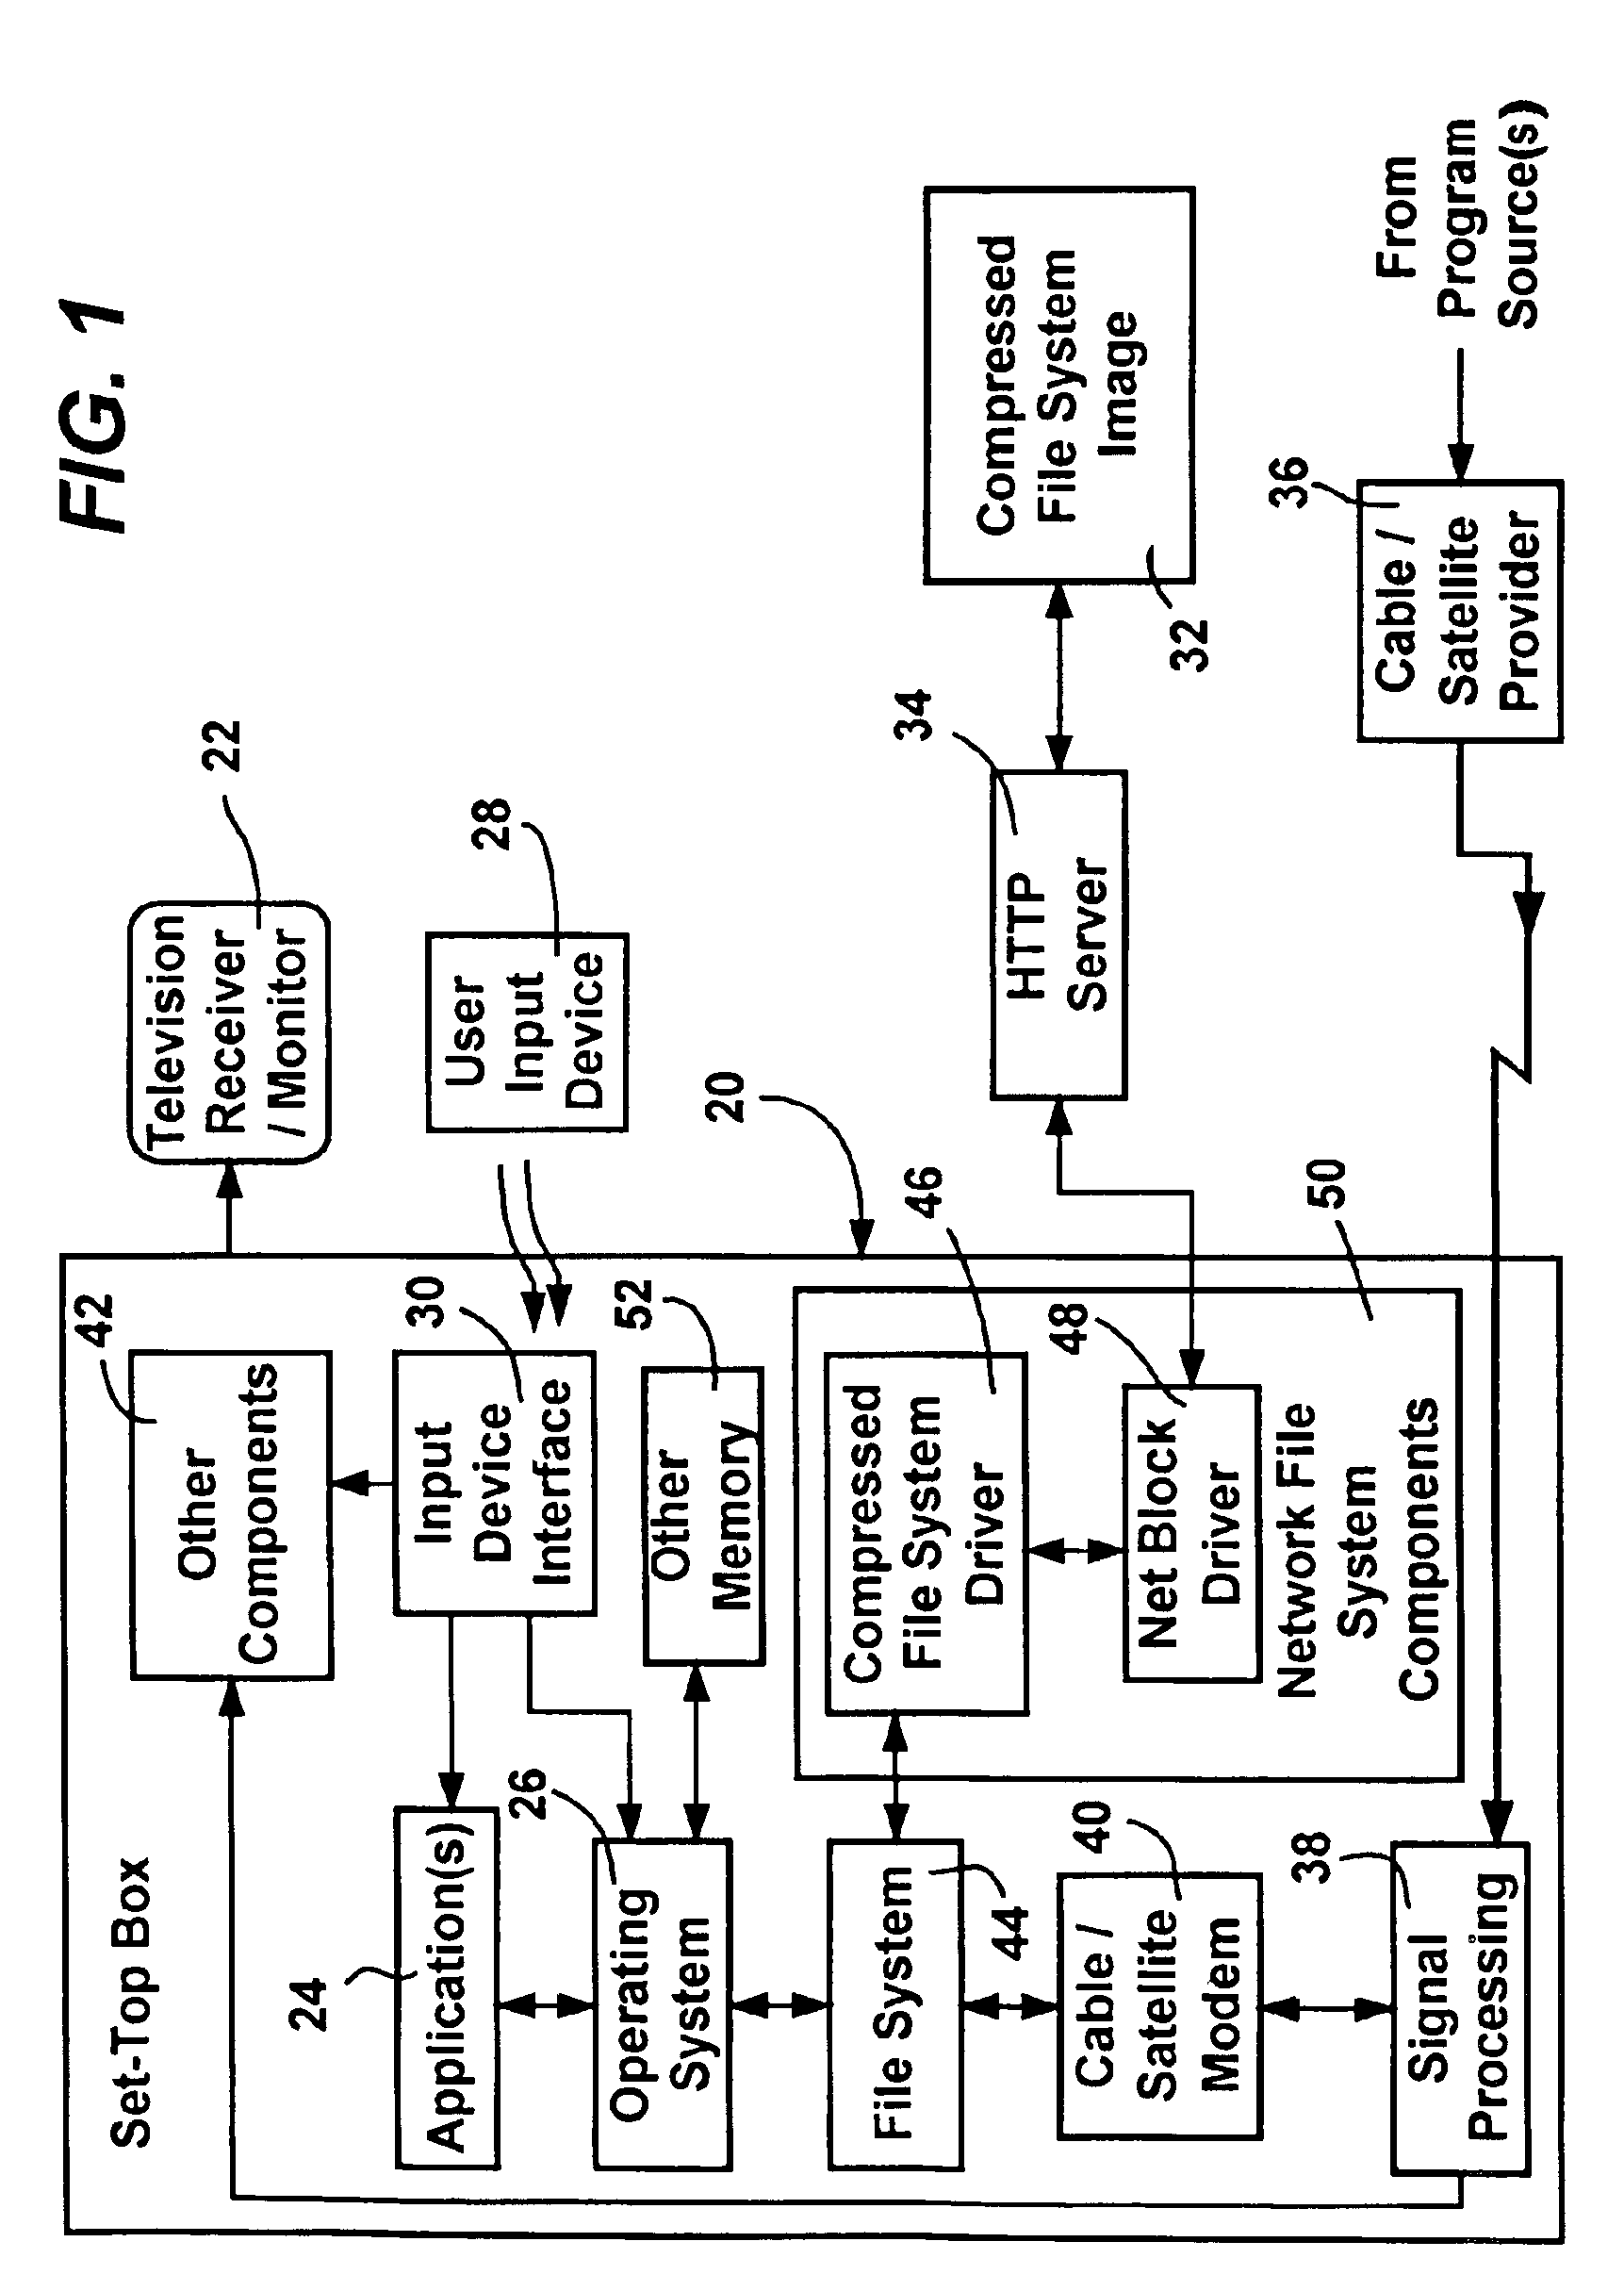 System and method for converting and reconverting between file system requests and access requests of a remote transfer protocol